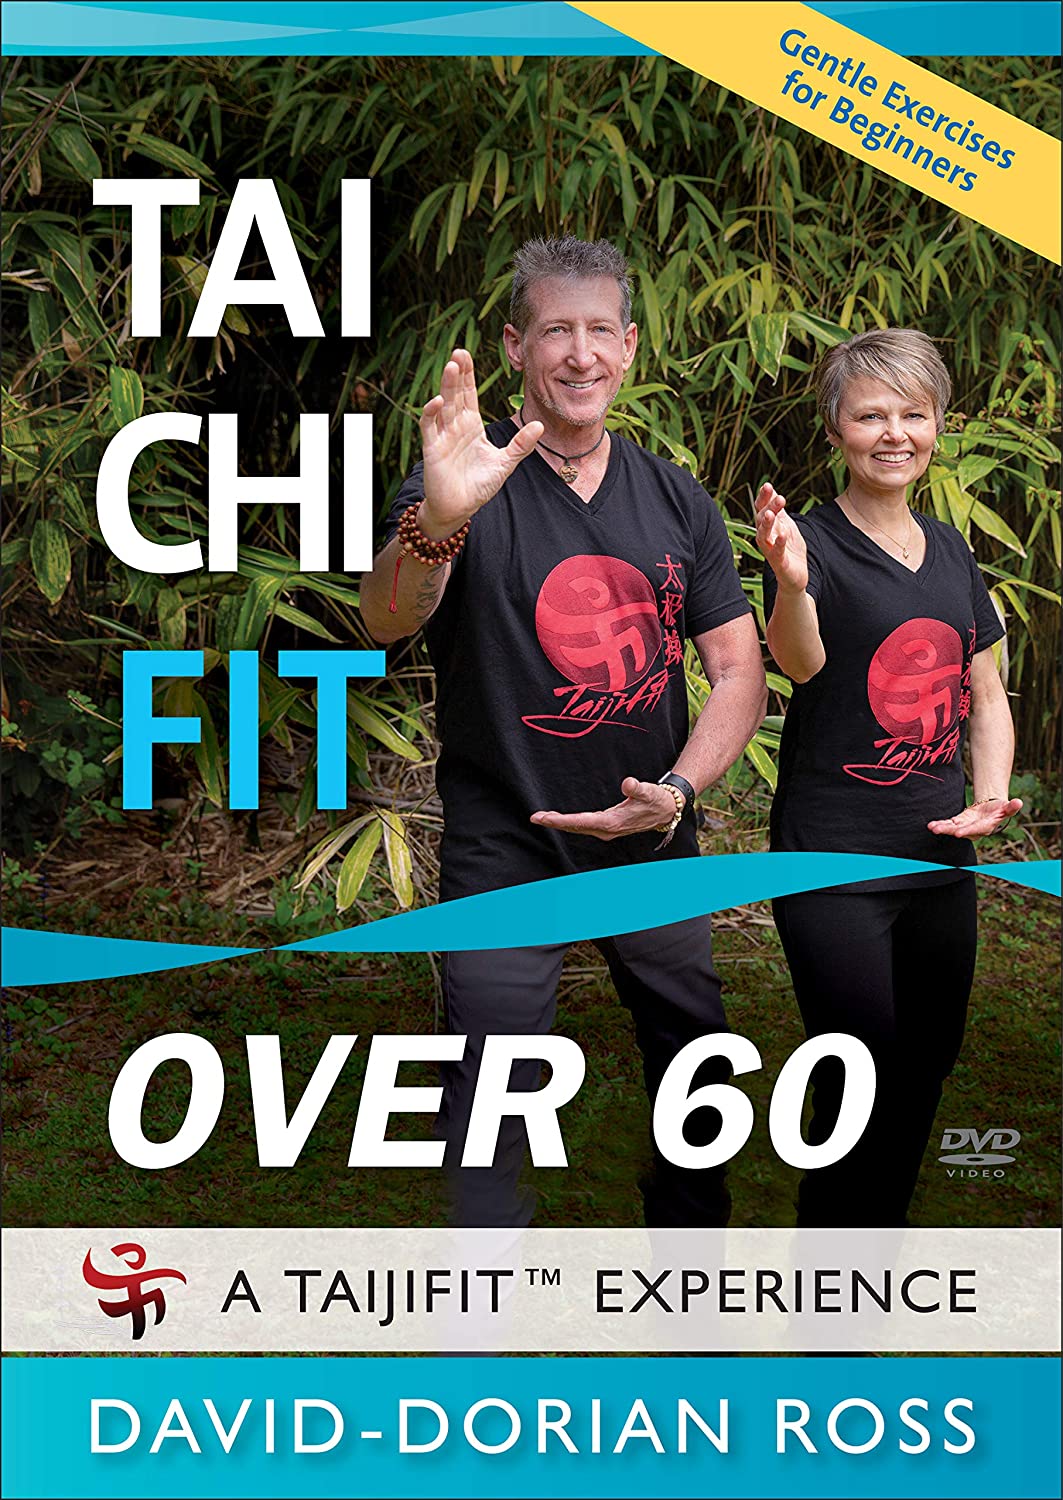 Tai Chi Fit Over 60: Gentle Exercises for Beginners DVD with David-Dorian Ross - Budovideos Inc